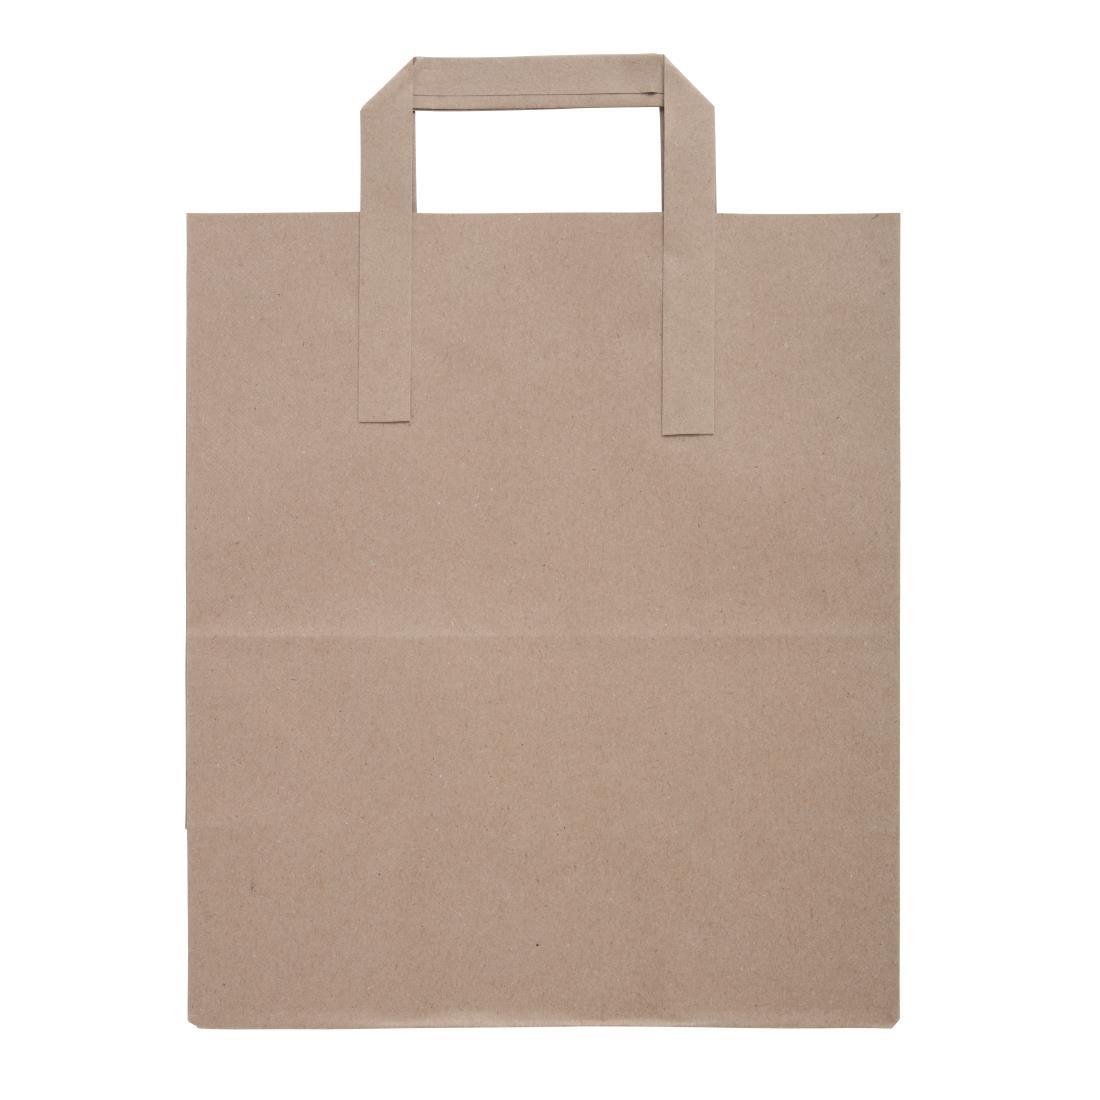 Fiesta Compostable Green Compostable Recycled Brown Paper Carrier Bags Large (Pack of 250) - CF592  - 2